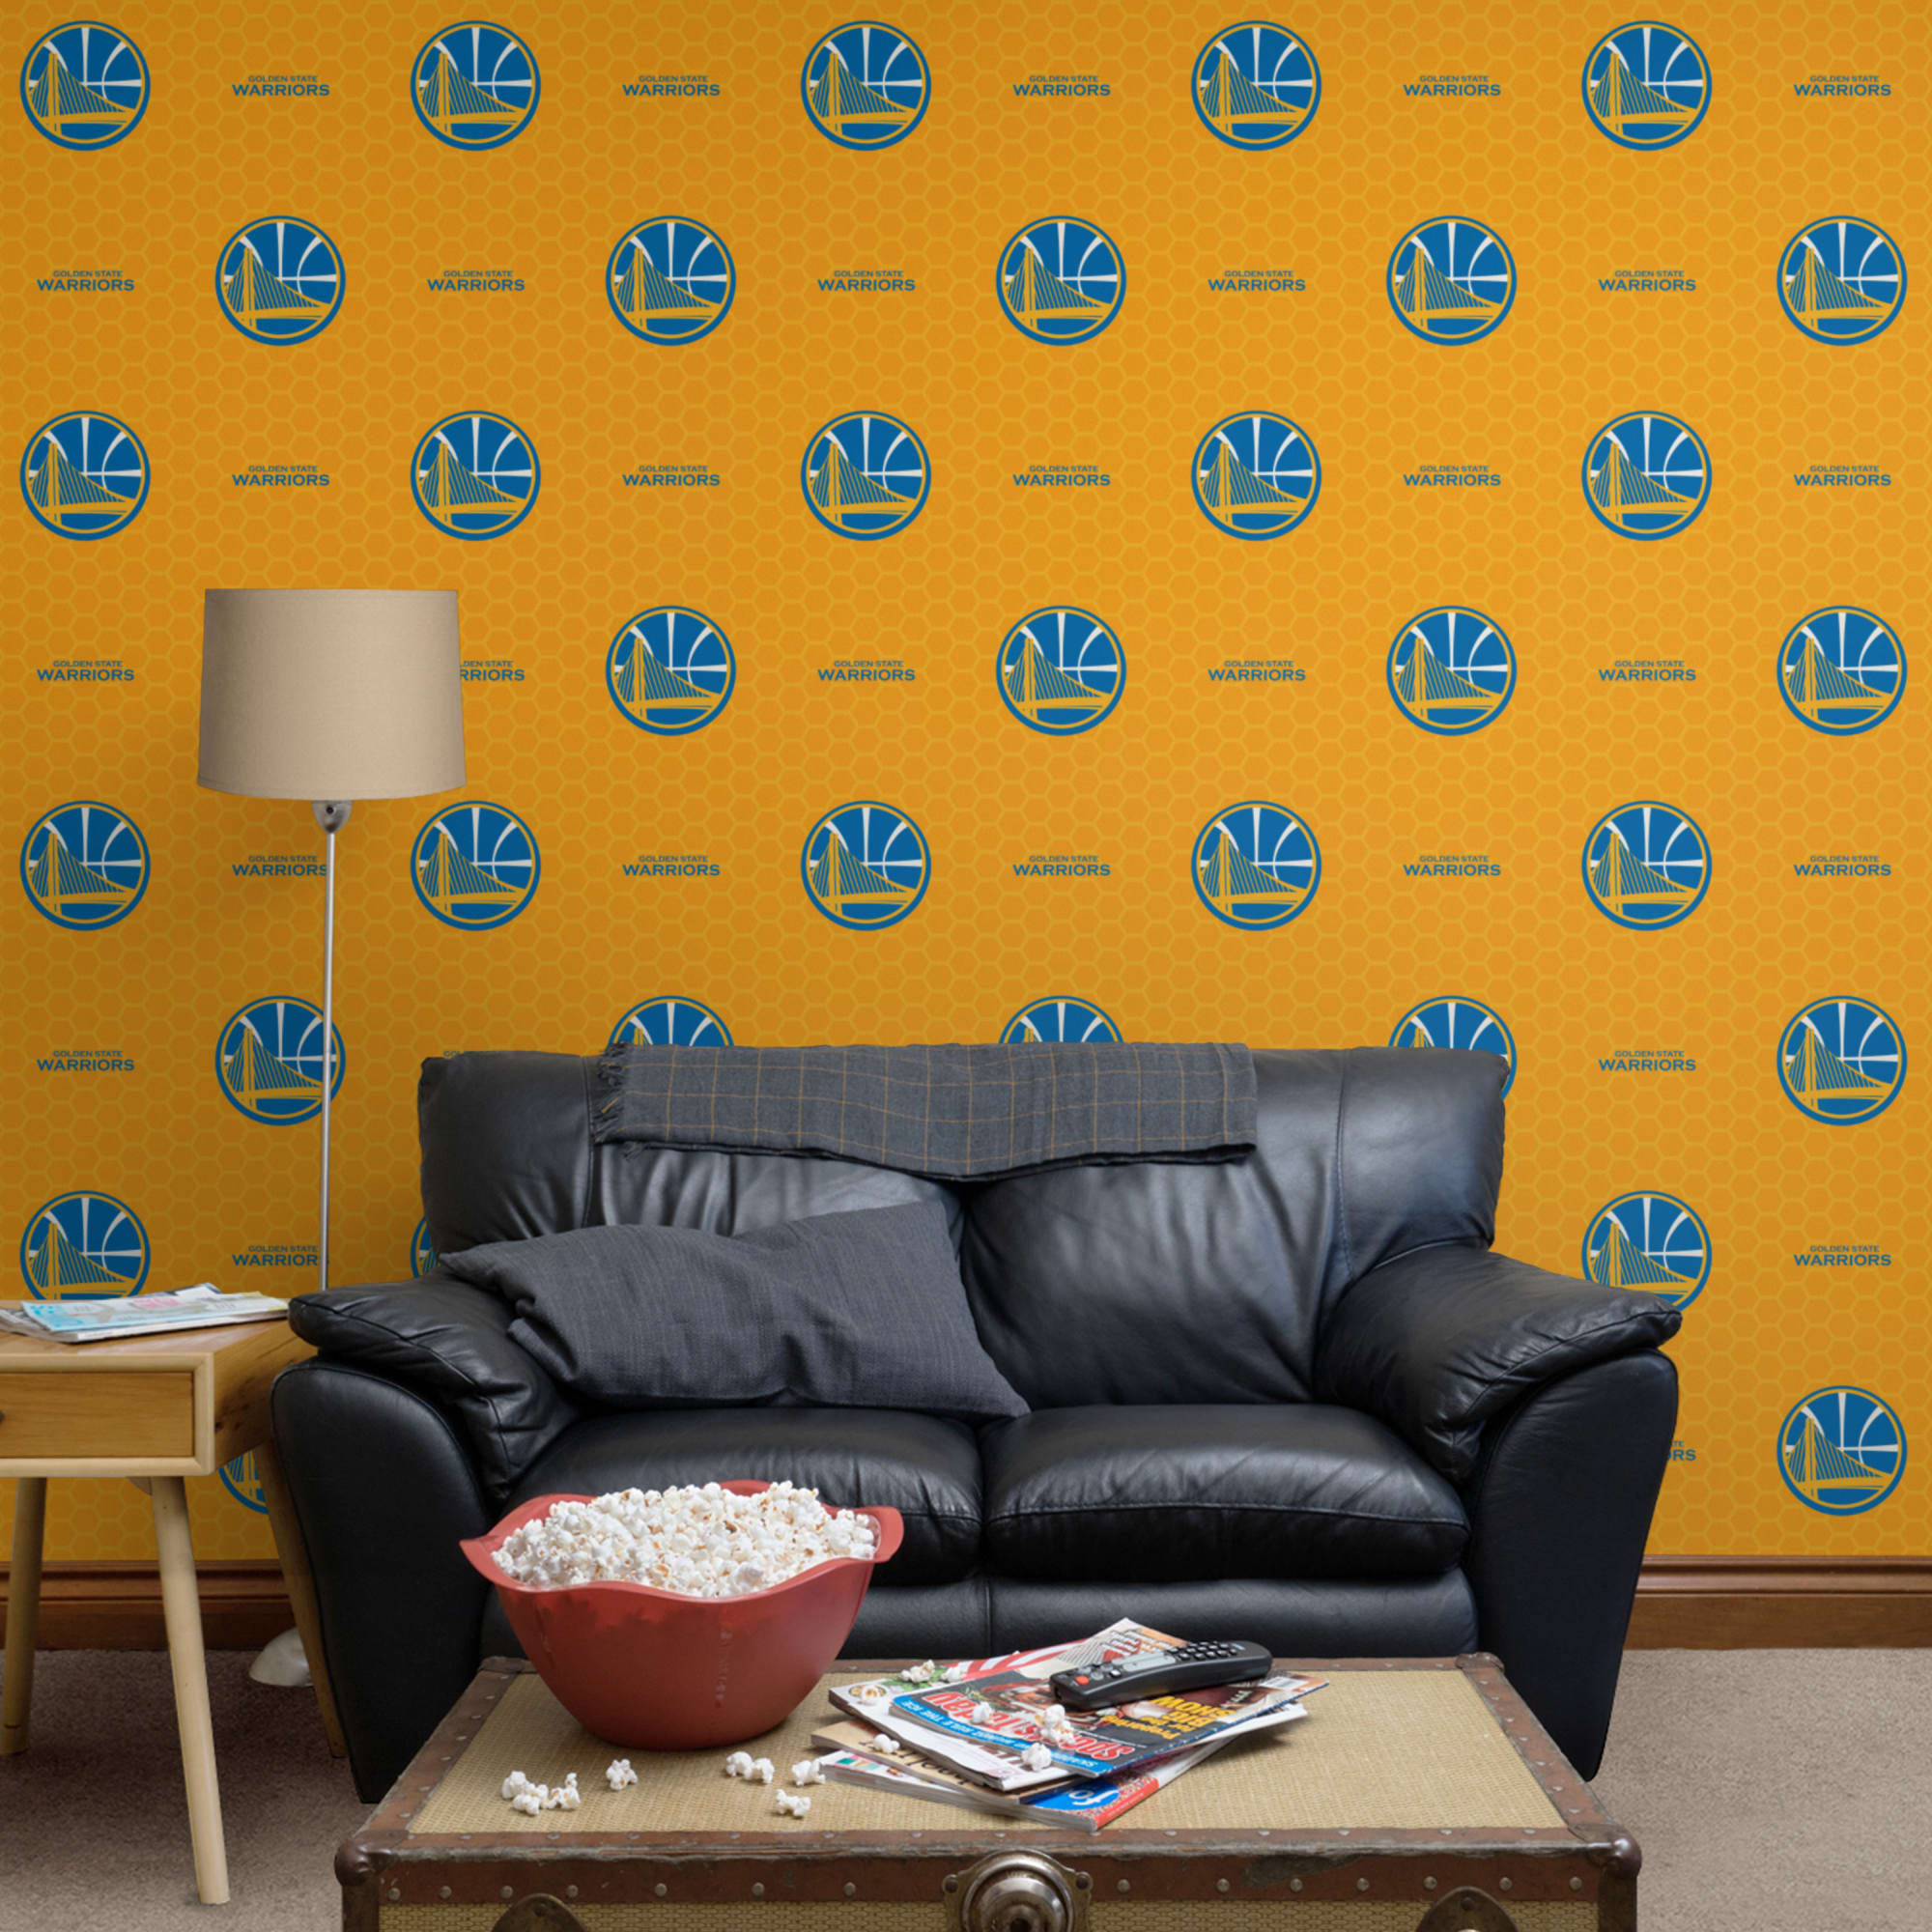 Golden State Warriors: Logo Pattern - Officially Licensed Removable Wallpaper 12" x 12" Sample by Fathead